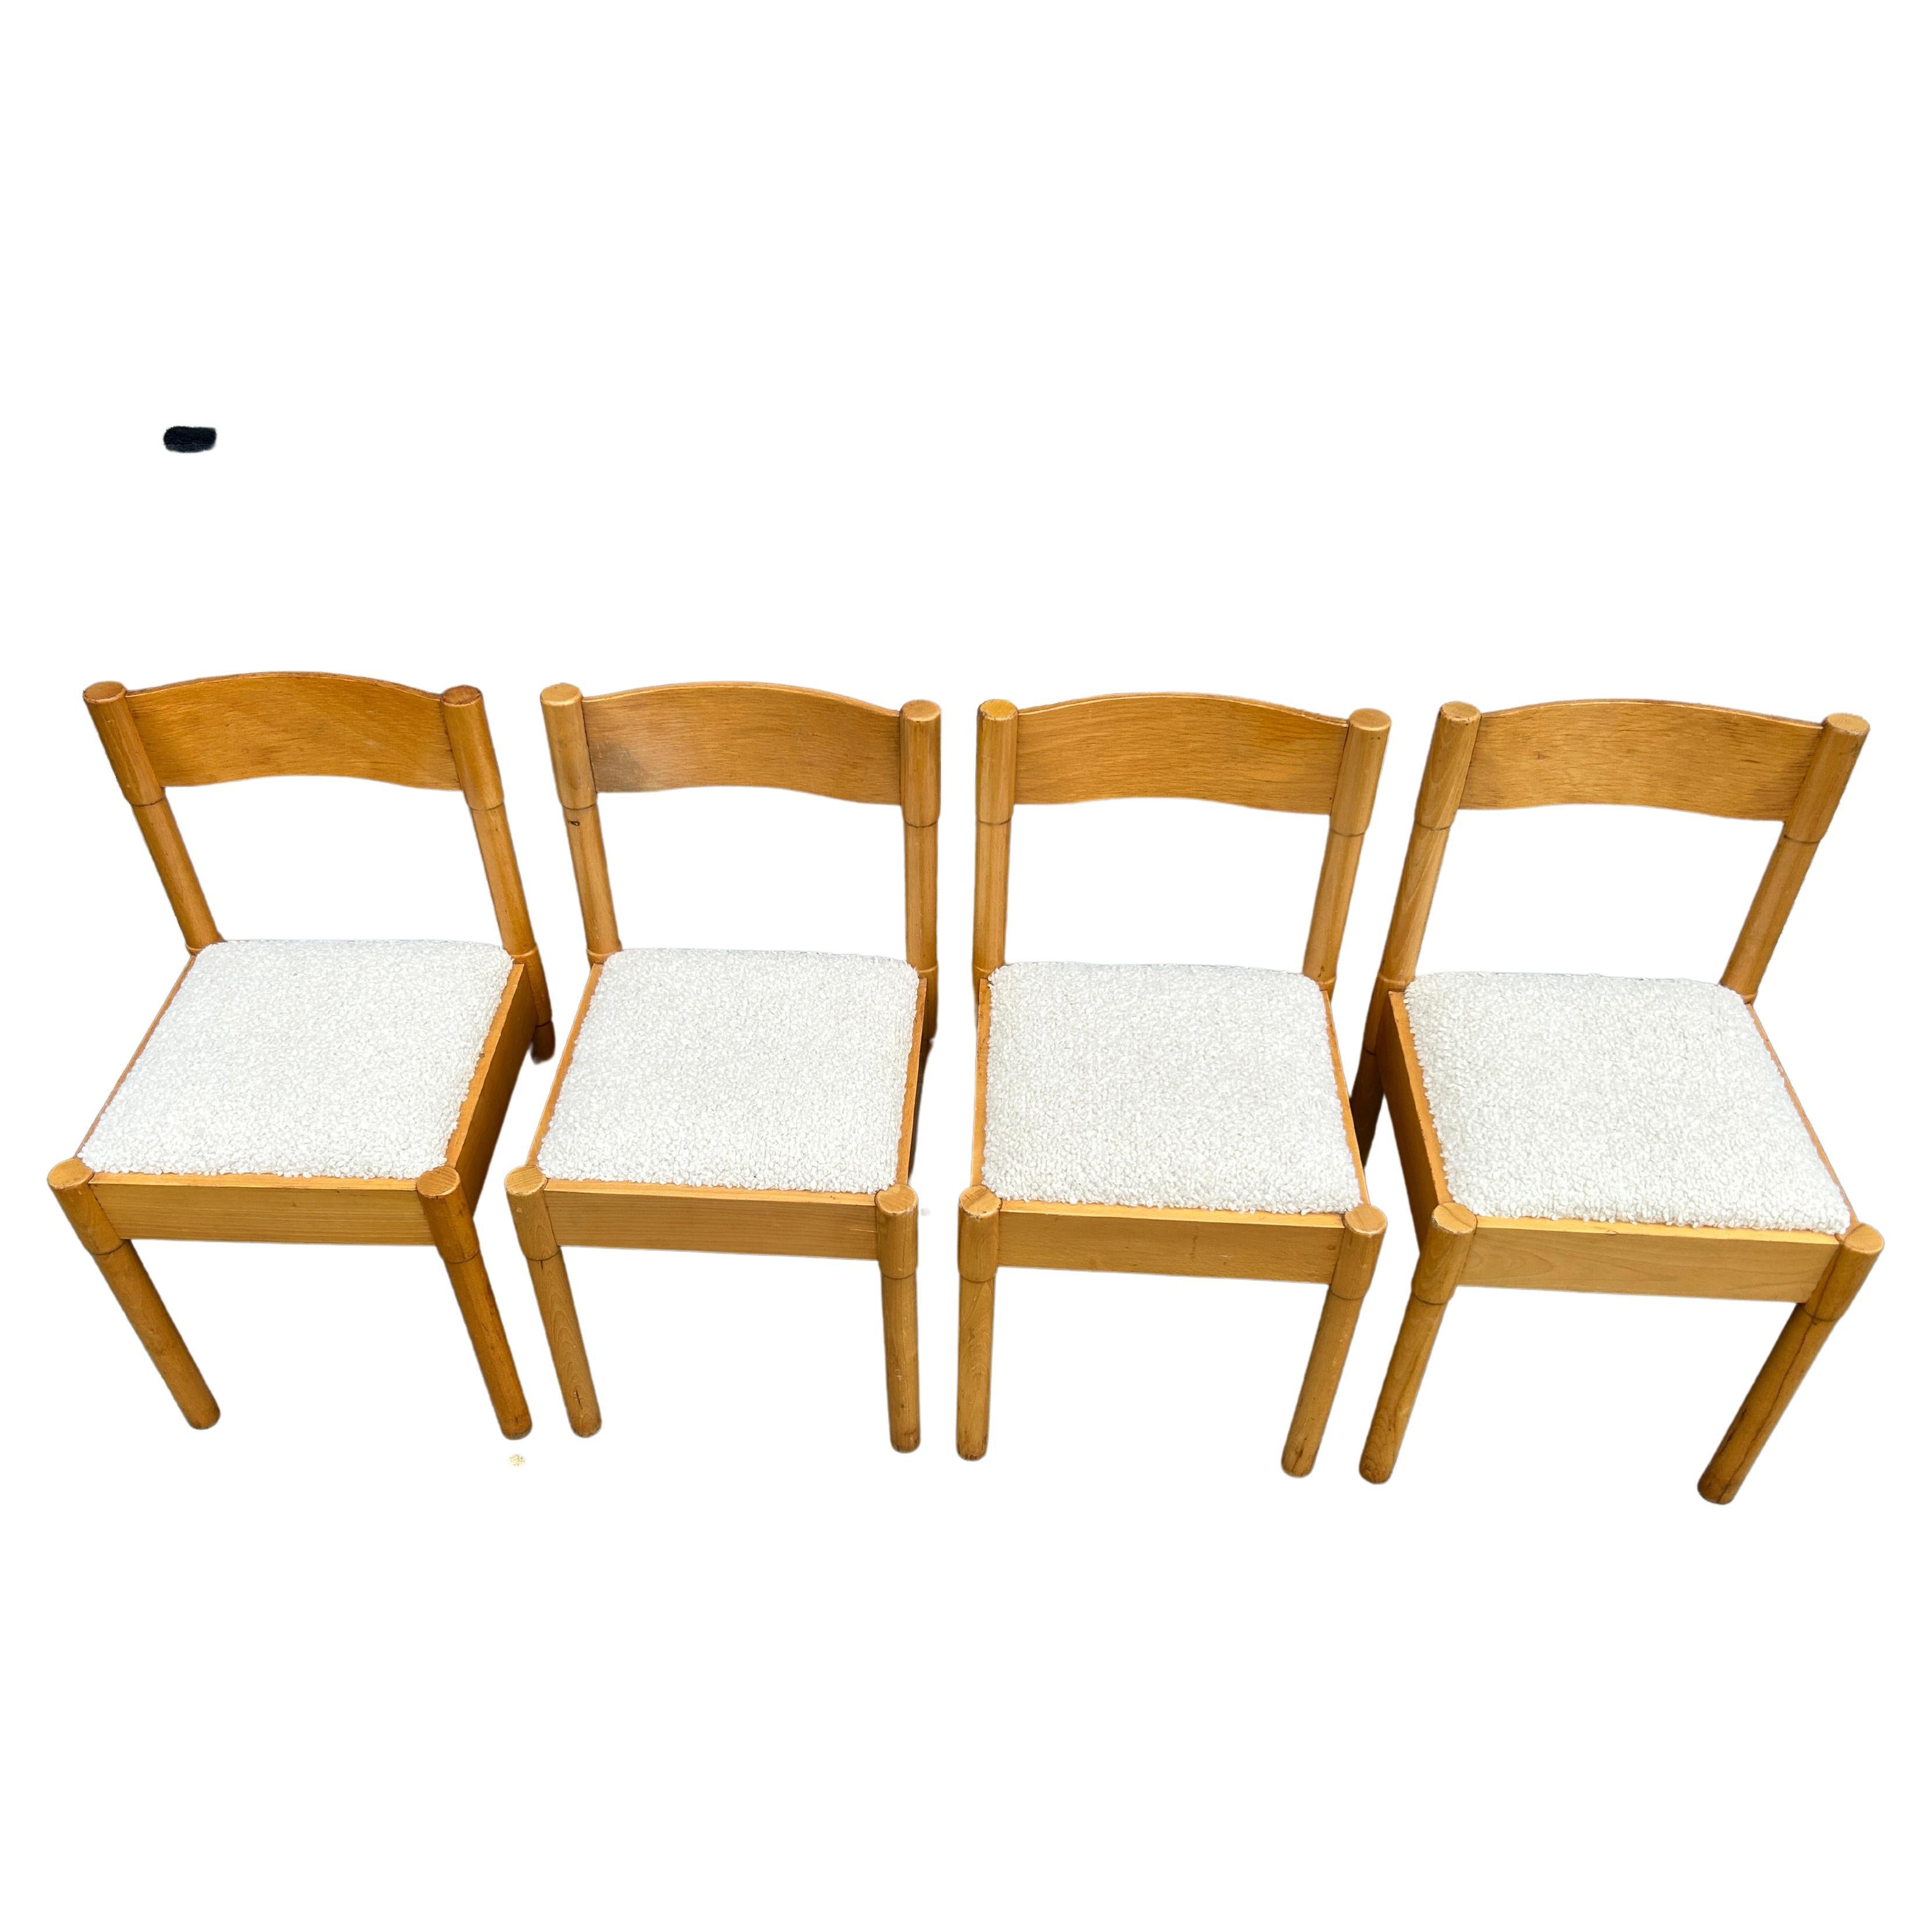 Beautiful set of (4) Mid-Century Modern blonde birch dining chairs with bouclé style of Cassina. Great set of simple solid Birch with bentwood back rest. Upholstery is Holly Hunt Alpaca bouclé. Round dowel construction legs and back support. Show